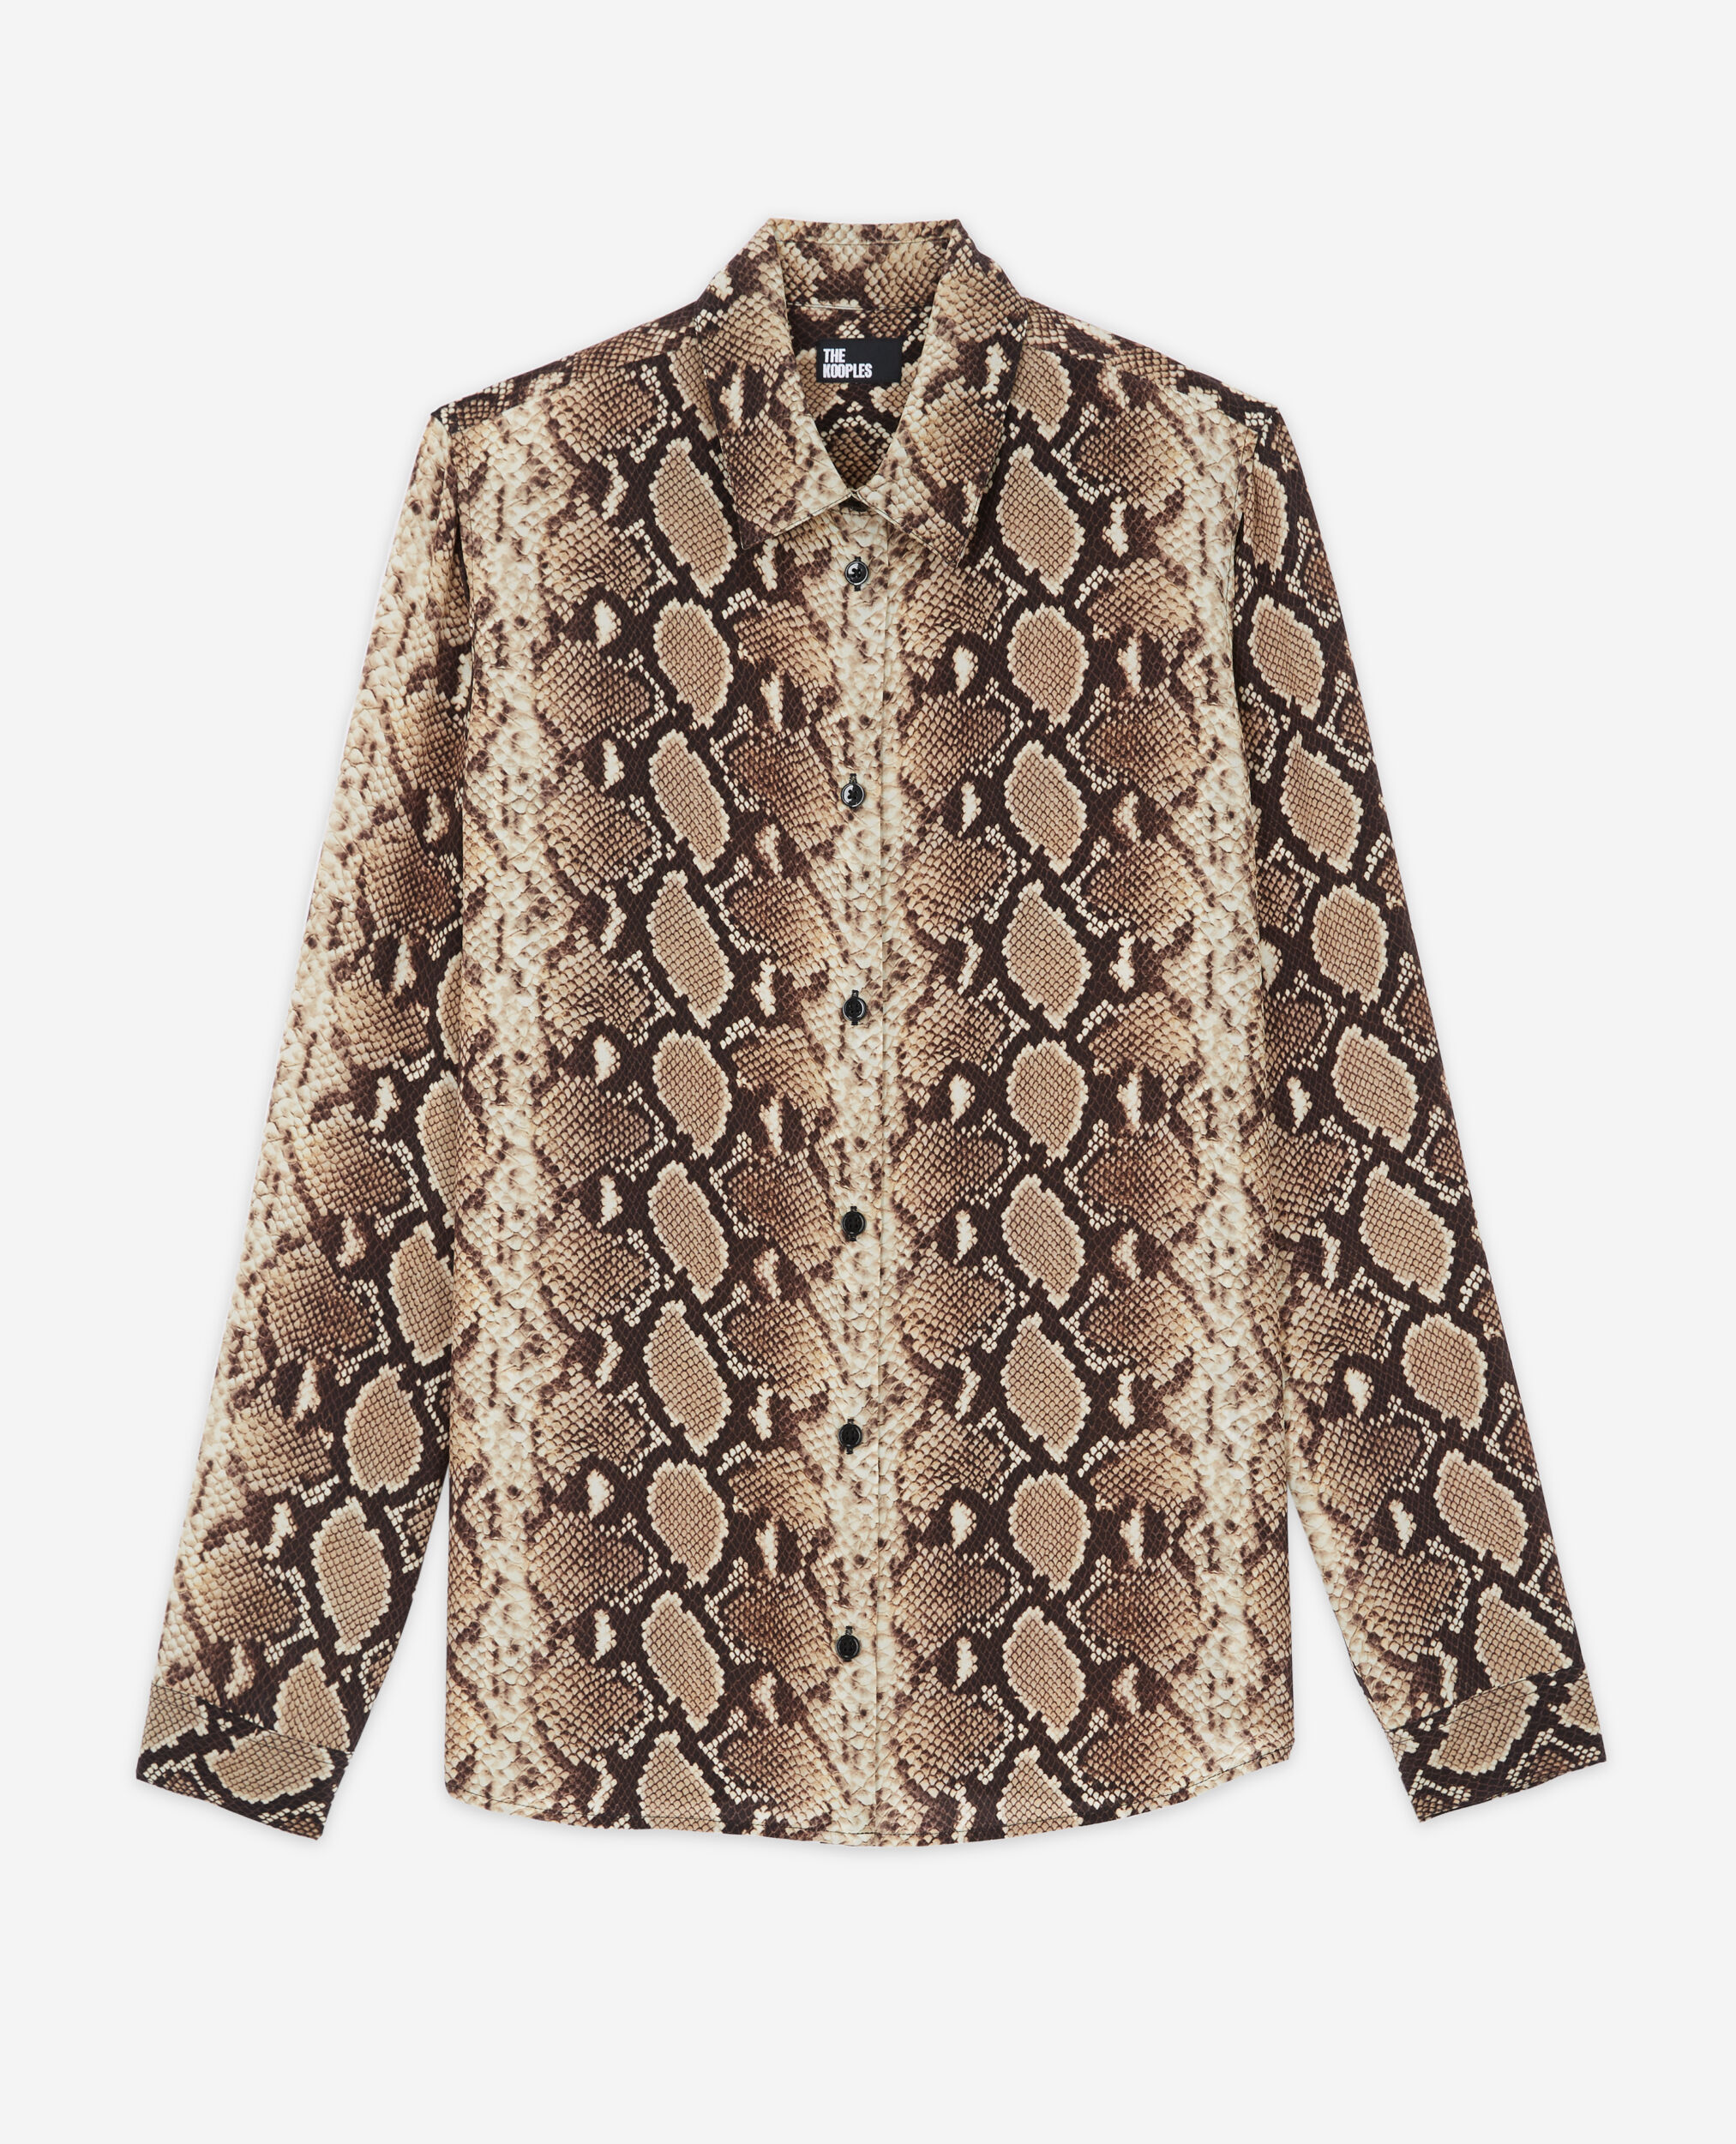 Demokrati Armstrong Soak The Kooples snakeskin print shirt, this season's star piece! Discover our  selection of women's ready-to-wear on the website and in store.